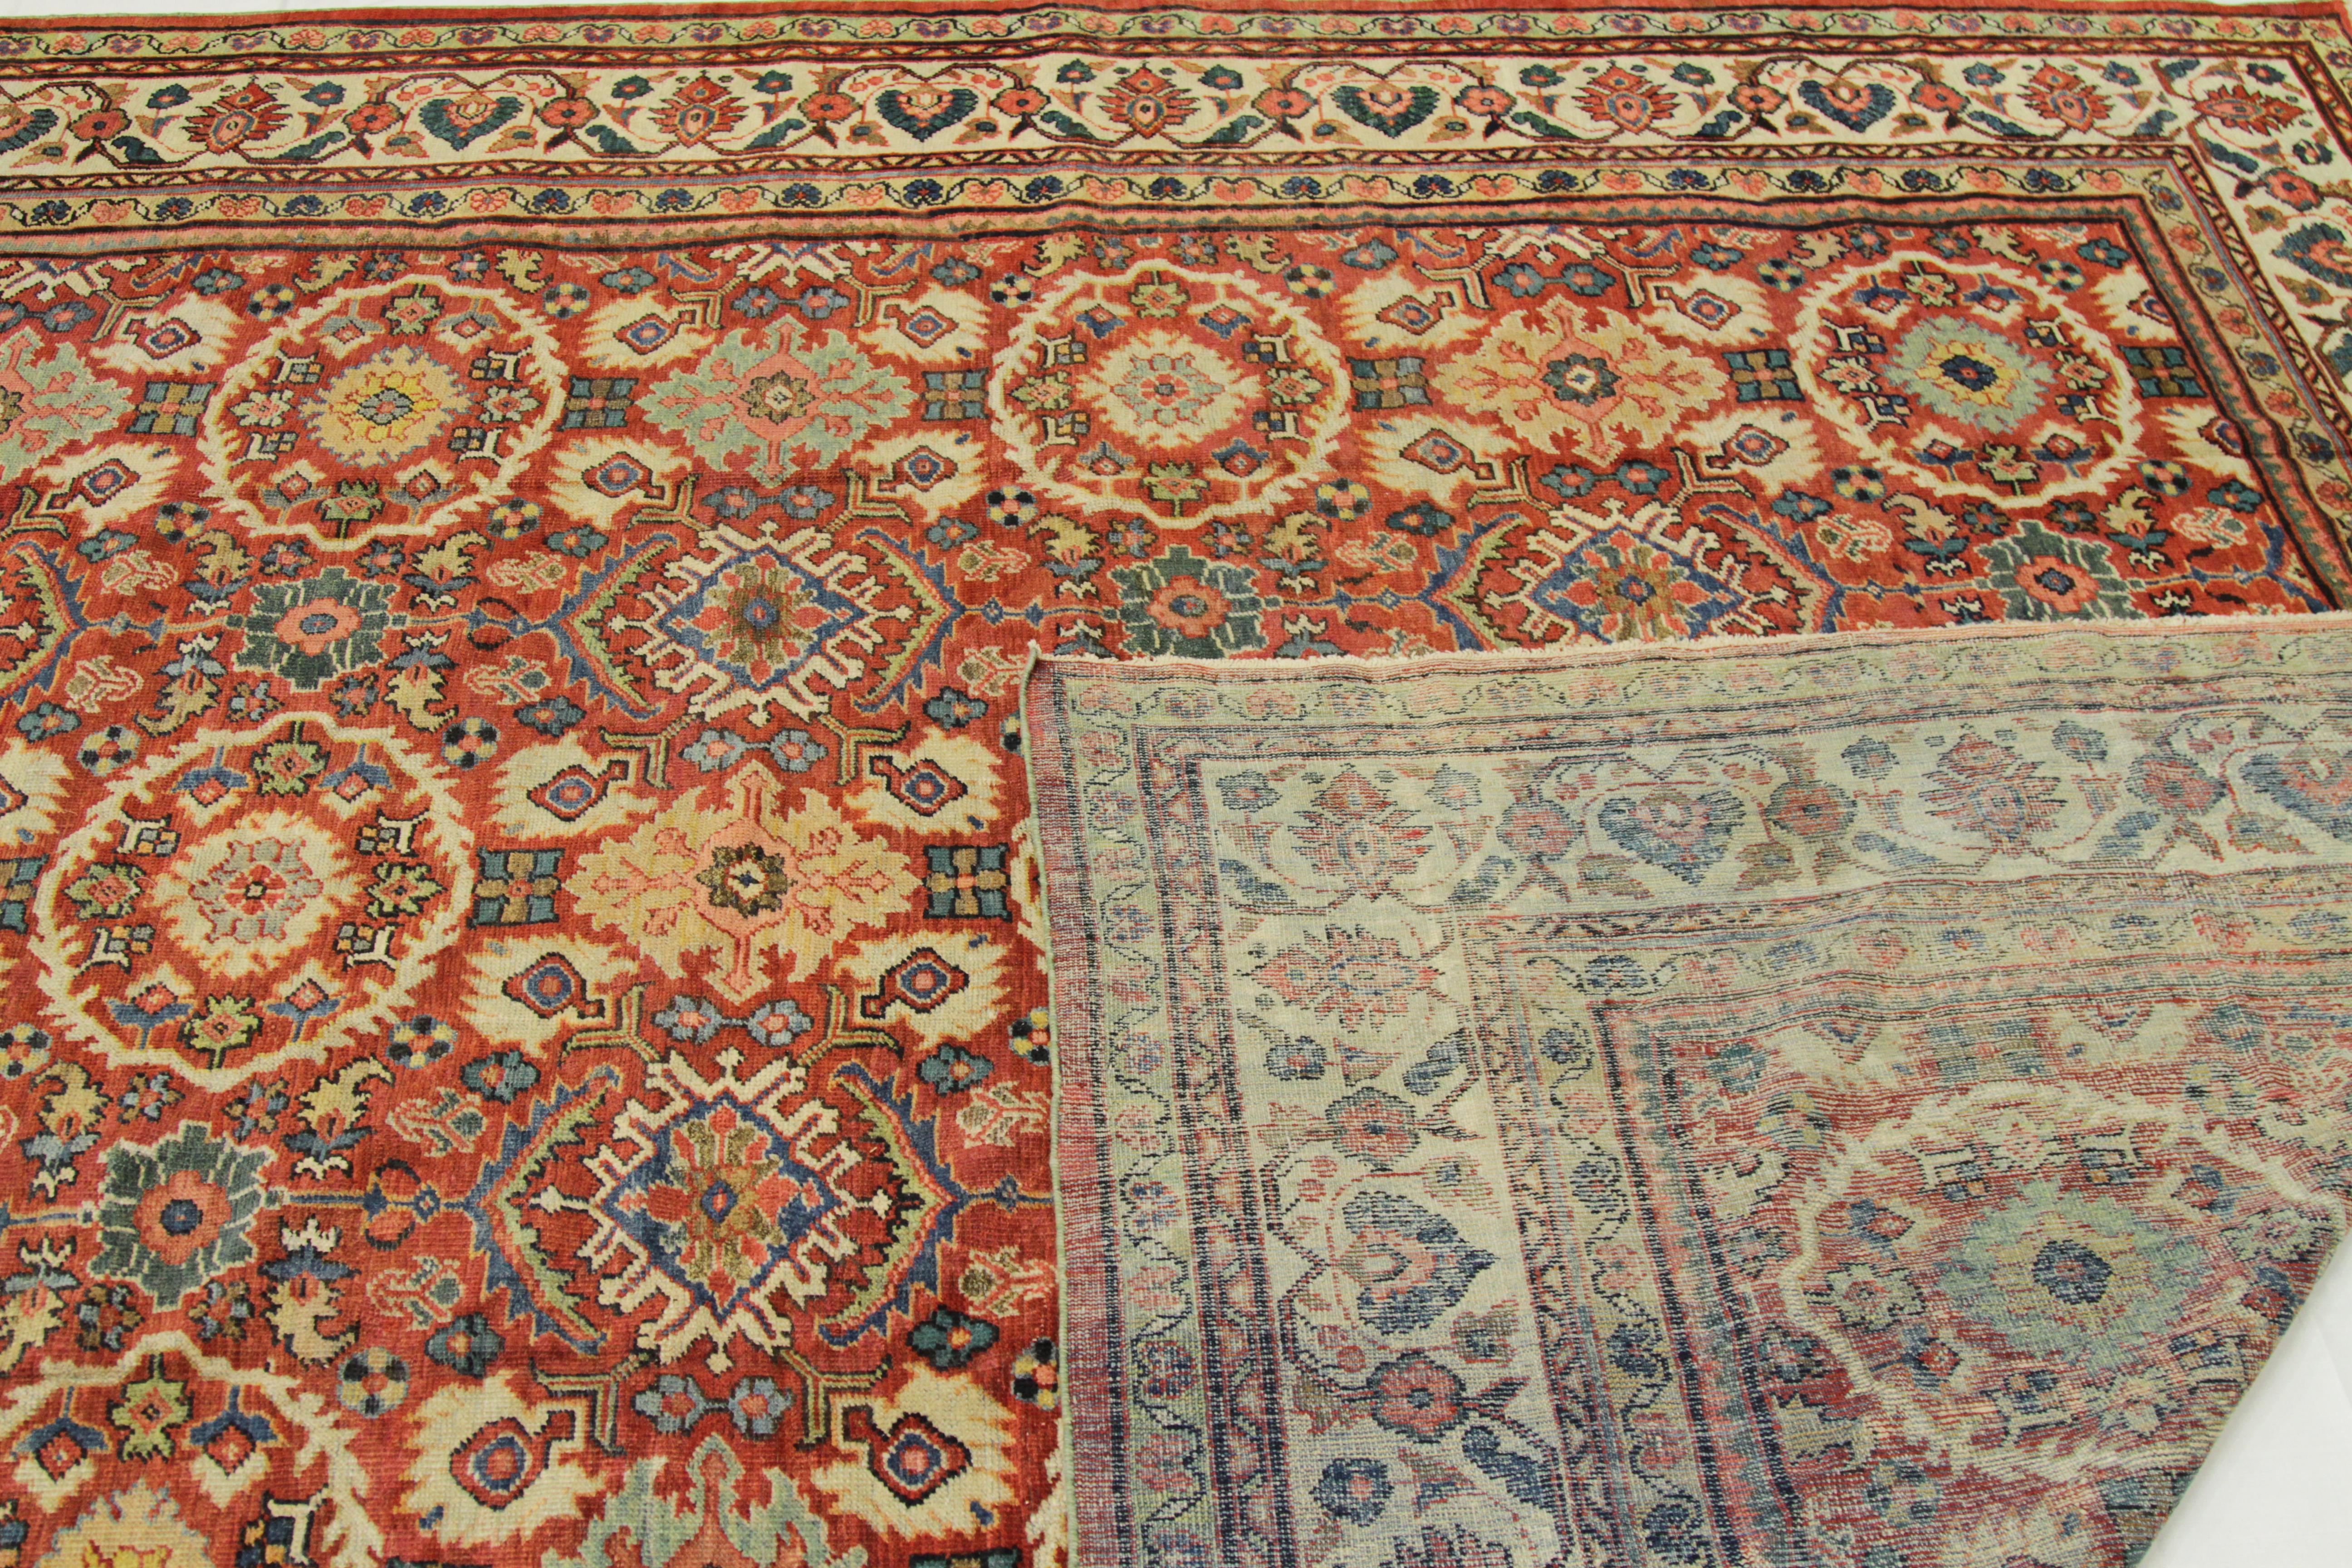 1930s Antique Sultanabad Persian Rug with Oval Floral Patterns in Ivory and Red In Excellent Condition For Sale In Dallas, TX